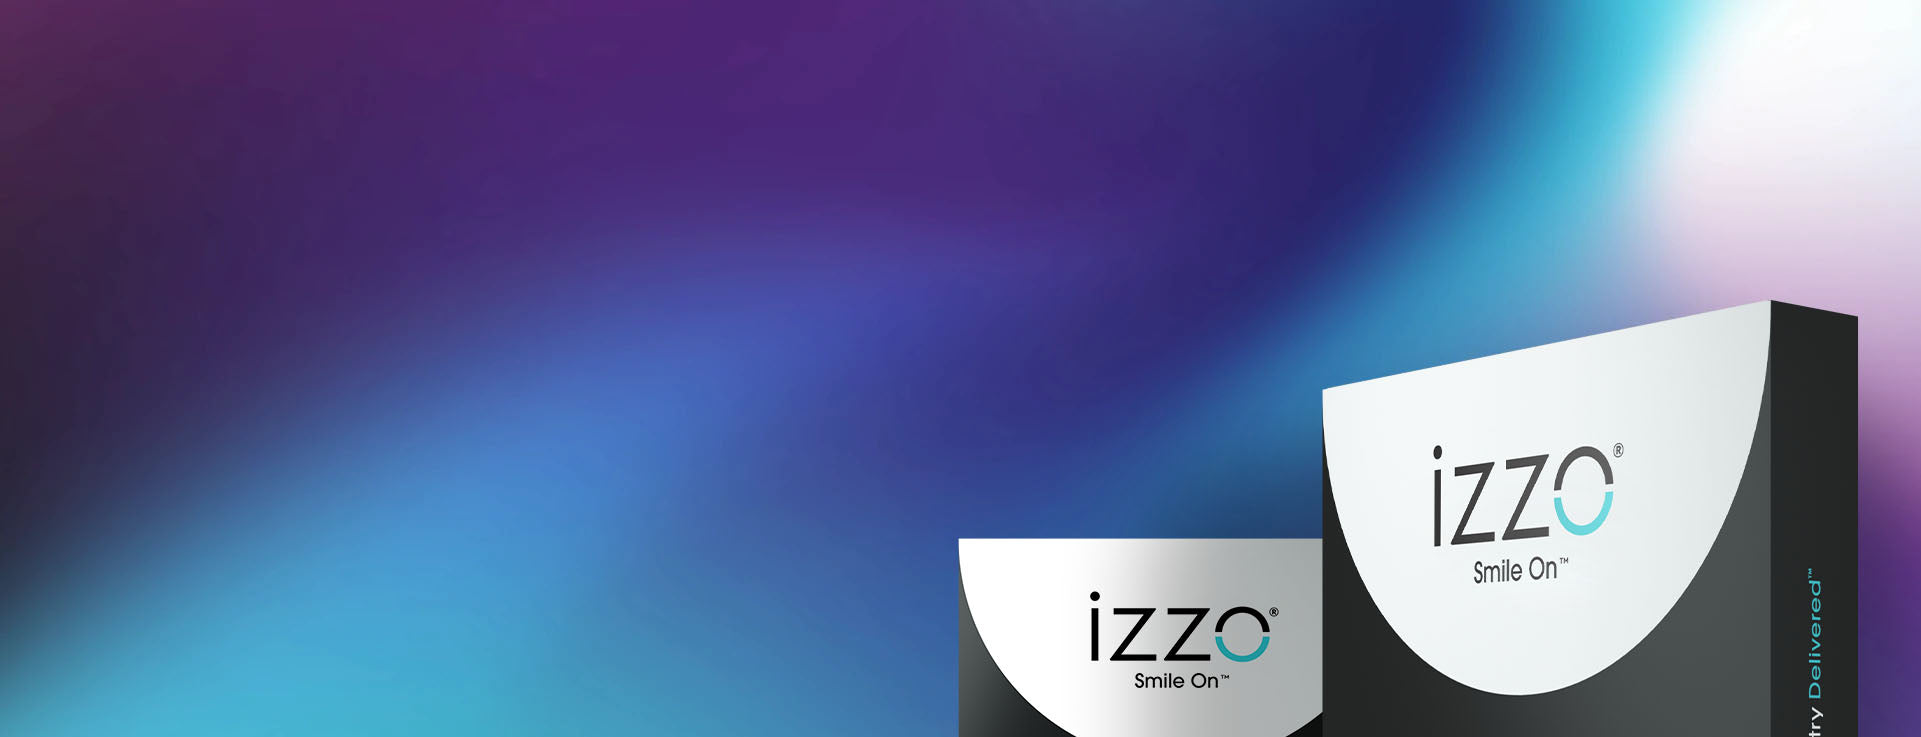 Buy izzo at a discount with professional pricing